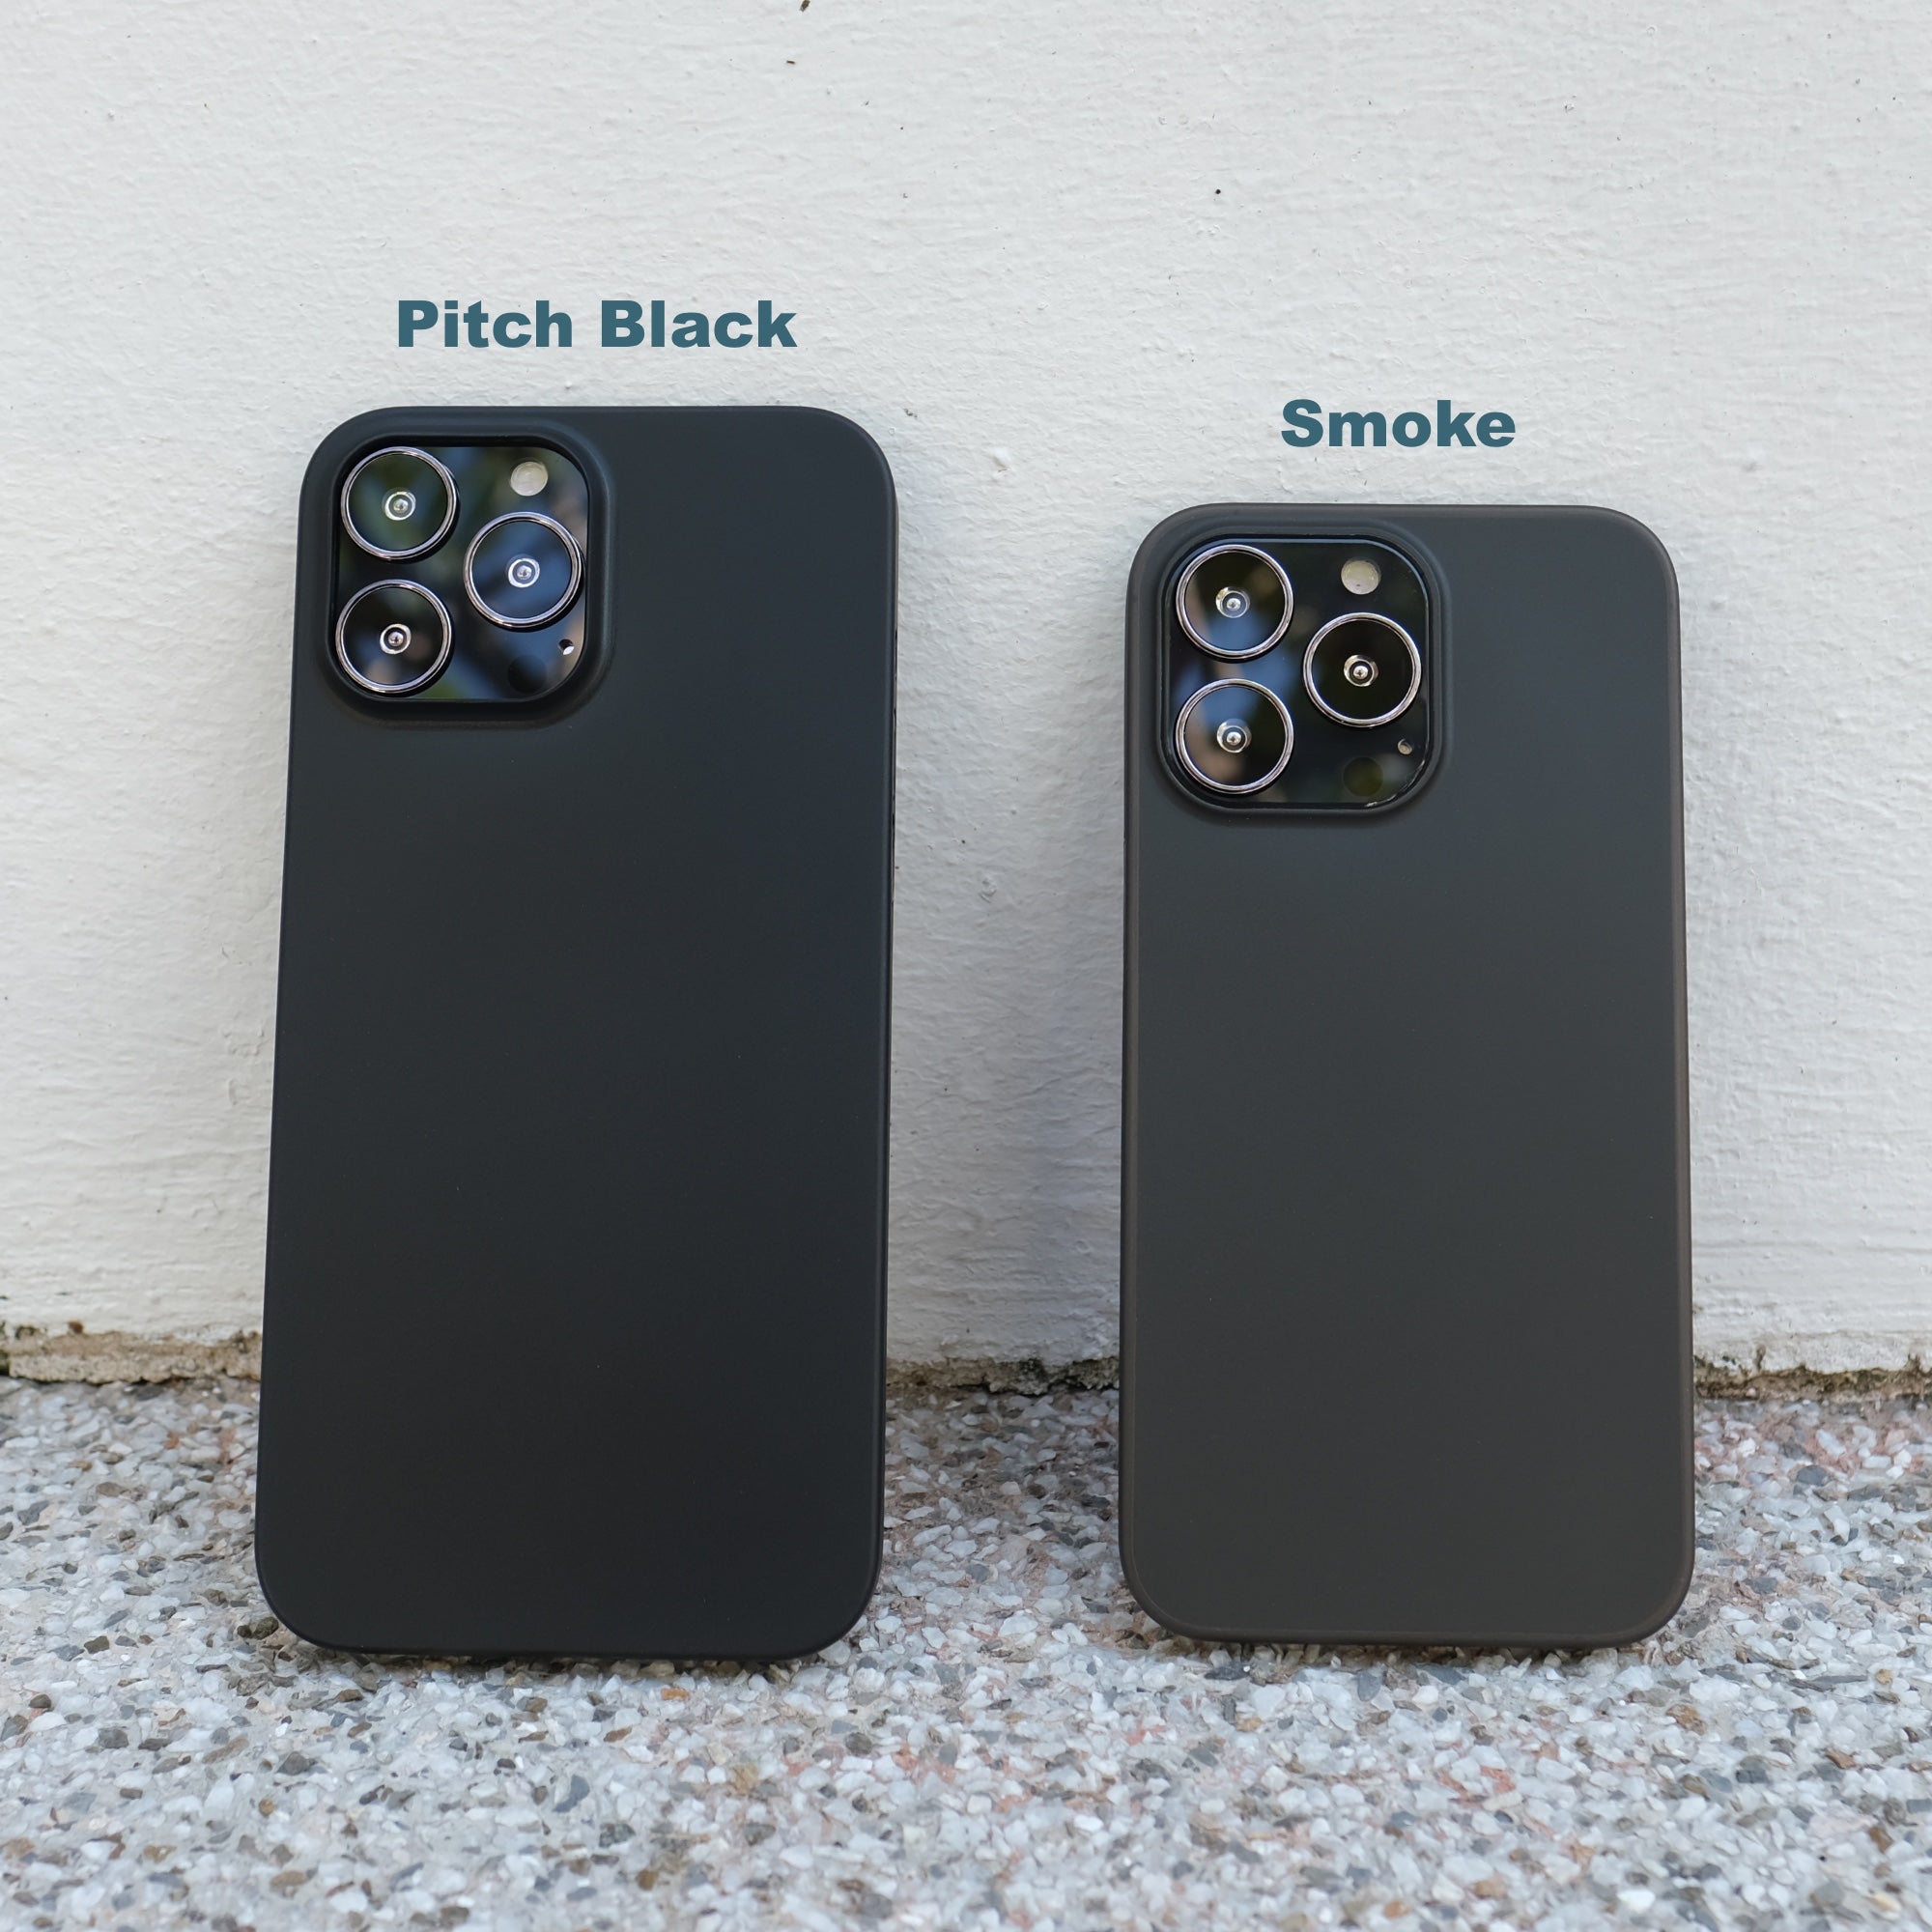 Bare Naked for iPhone 13 Pro and iPhone 13 Pro Max - Thinnest Case for iPhone 13 Pro and iPhone 13 Pro Max - Pitch Black vs Smoke